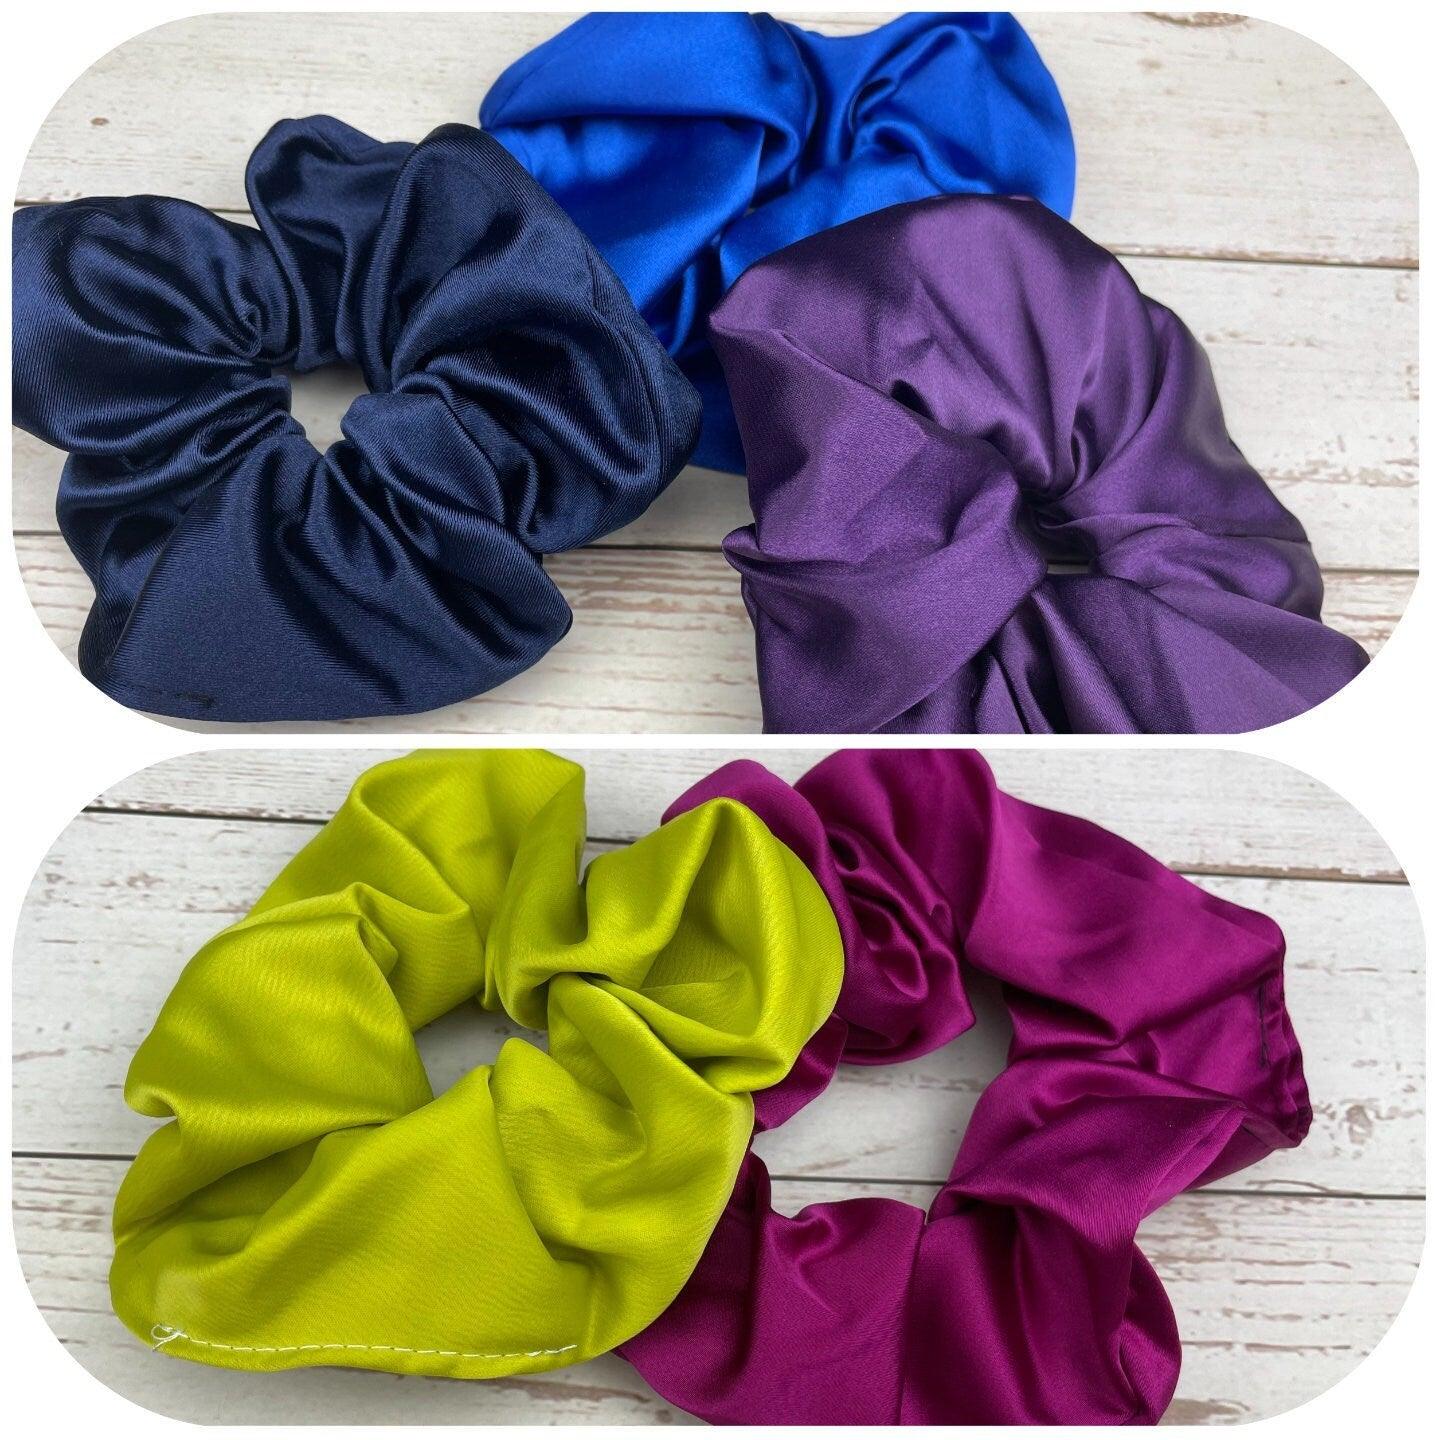 Clourful Handmade Satin Scrunchie With Bow